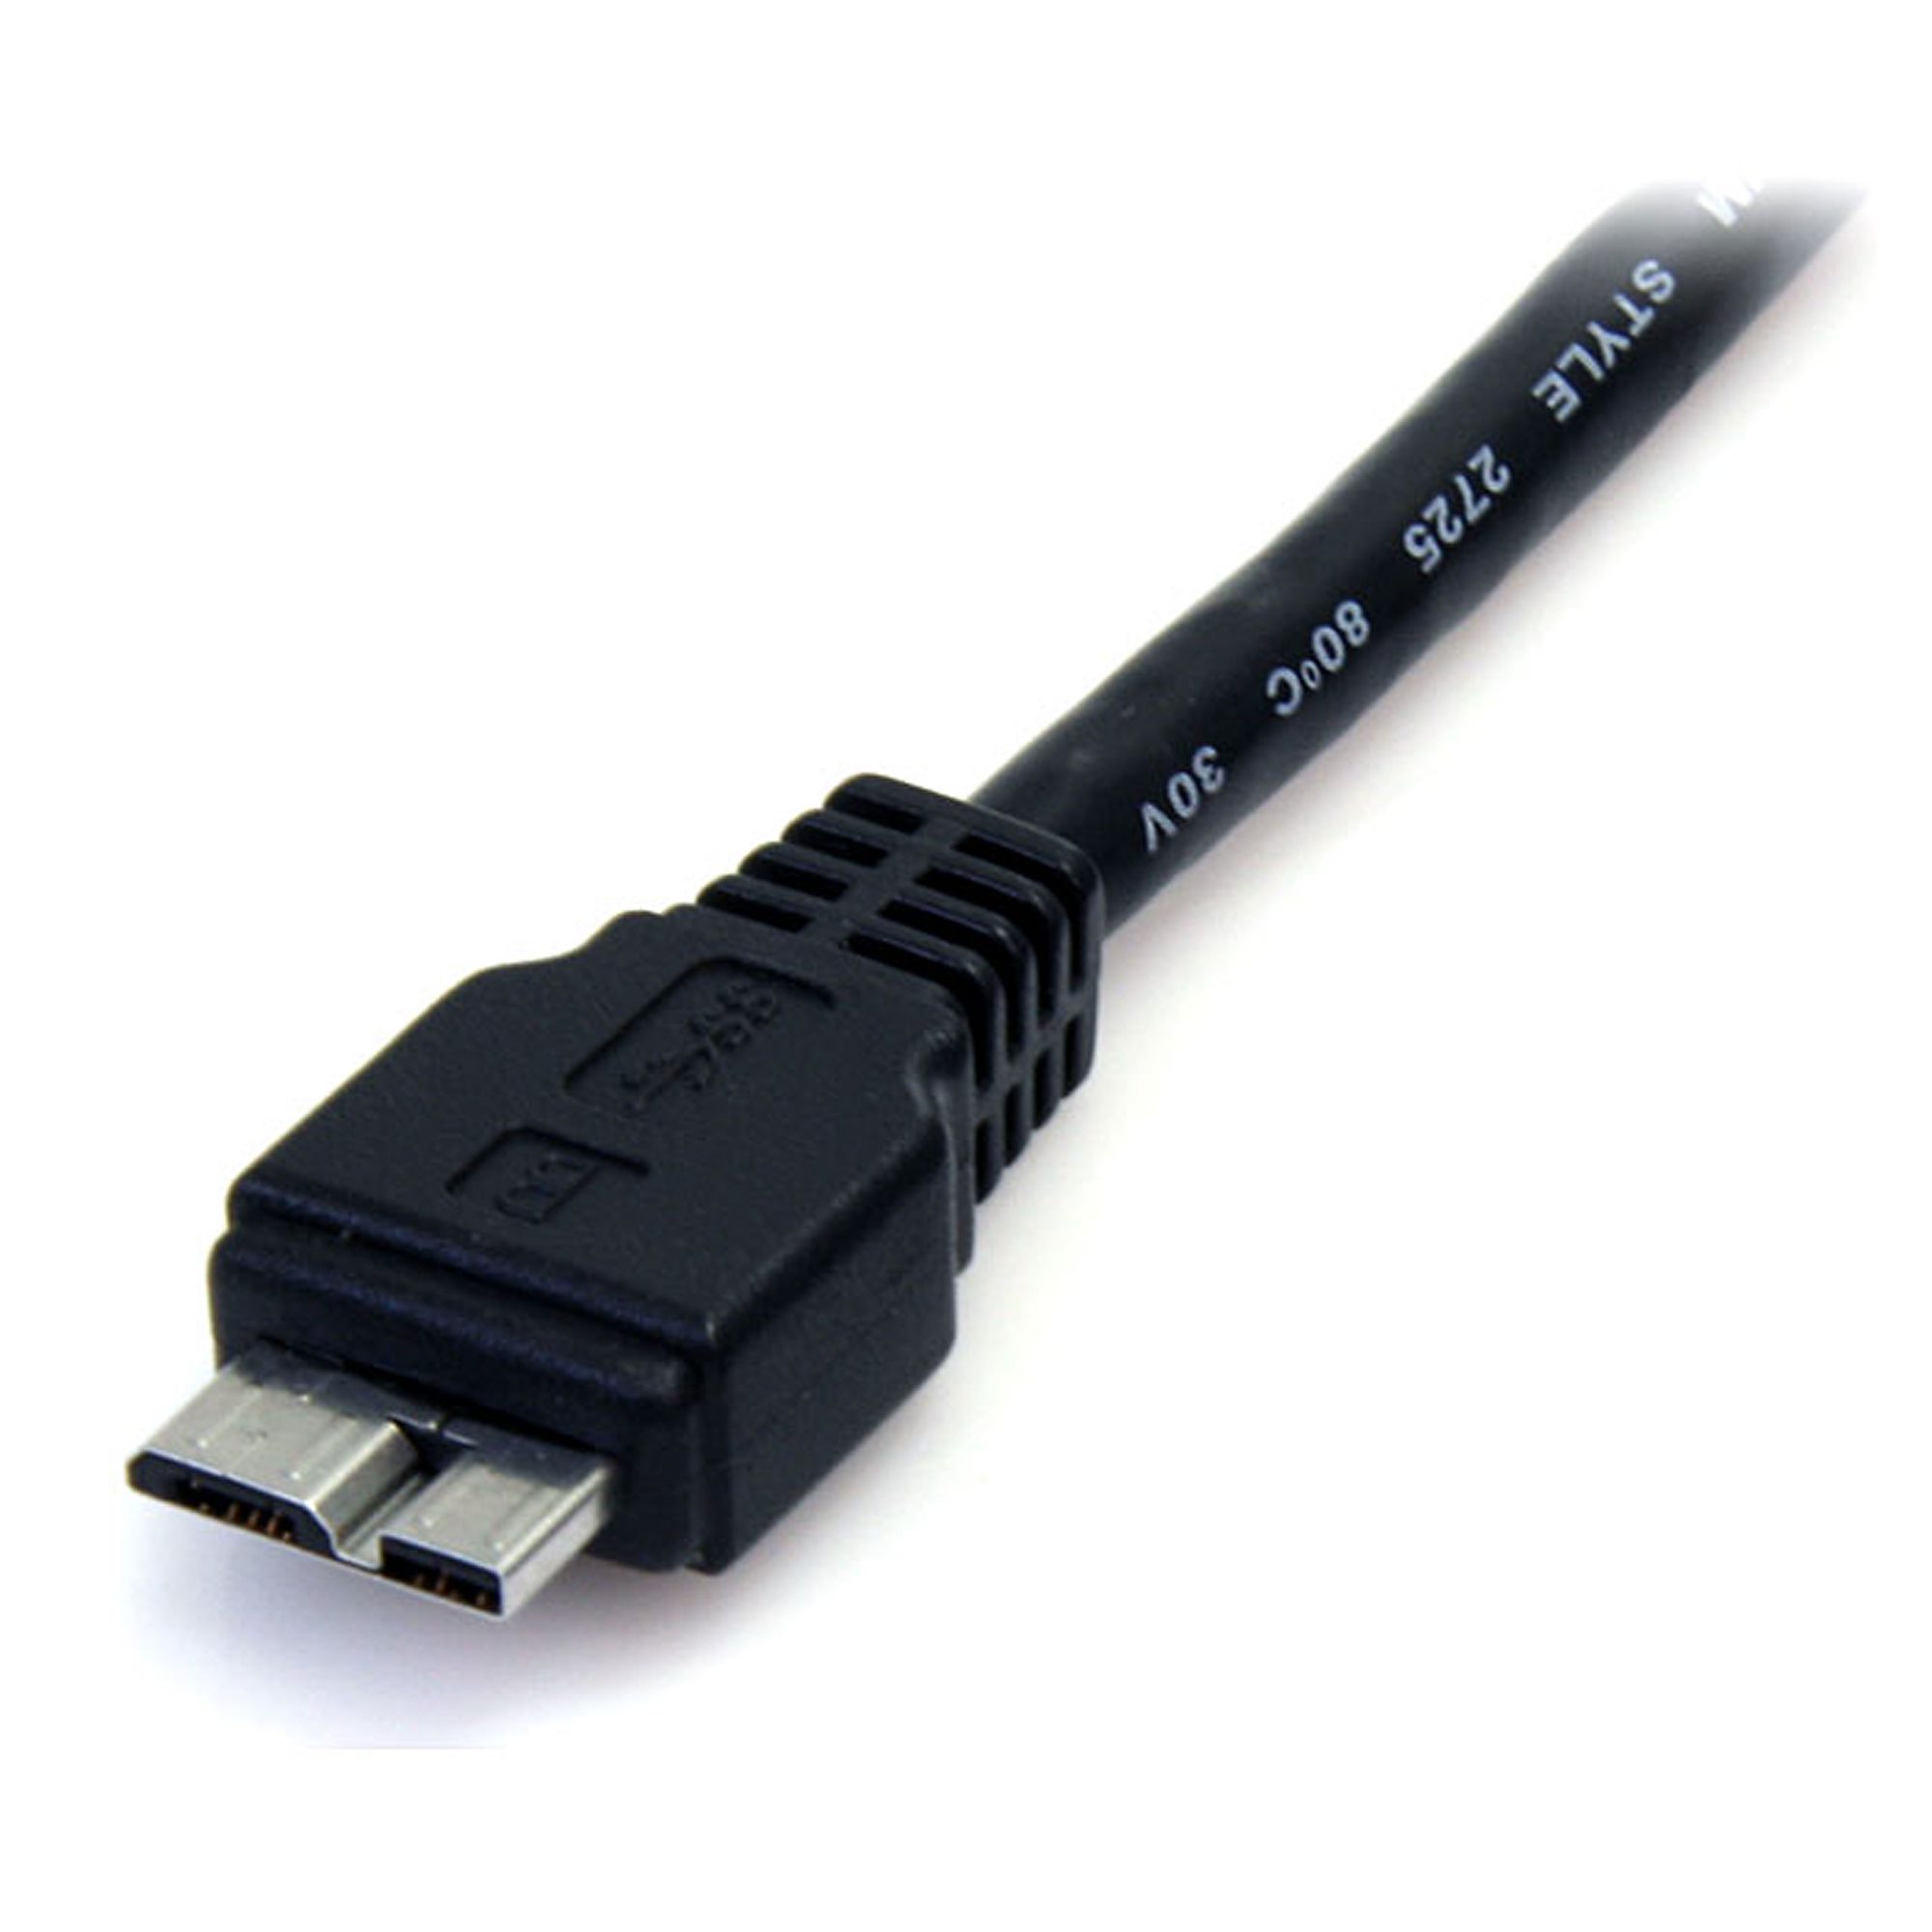 Wide range In time educator 0.5m 1.5ft Black USB 3.0 Micro B Cable - USB 3.0 Cables | Cables |  StarTech.com Canada